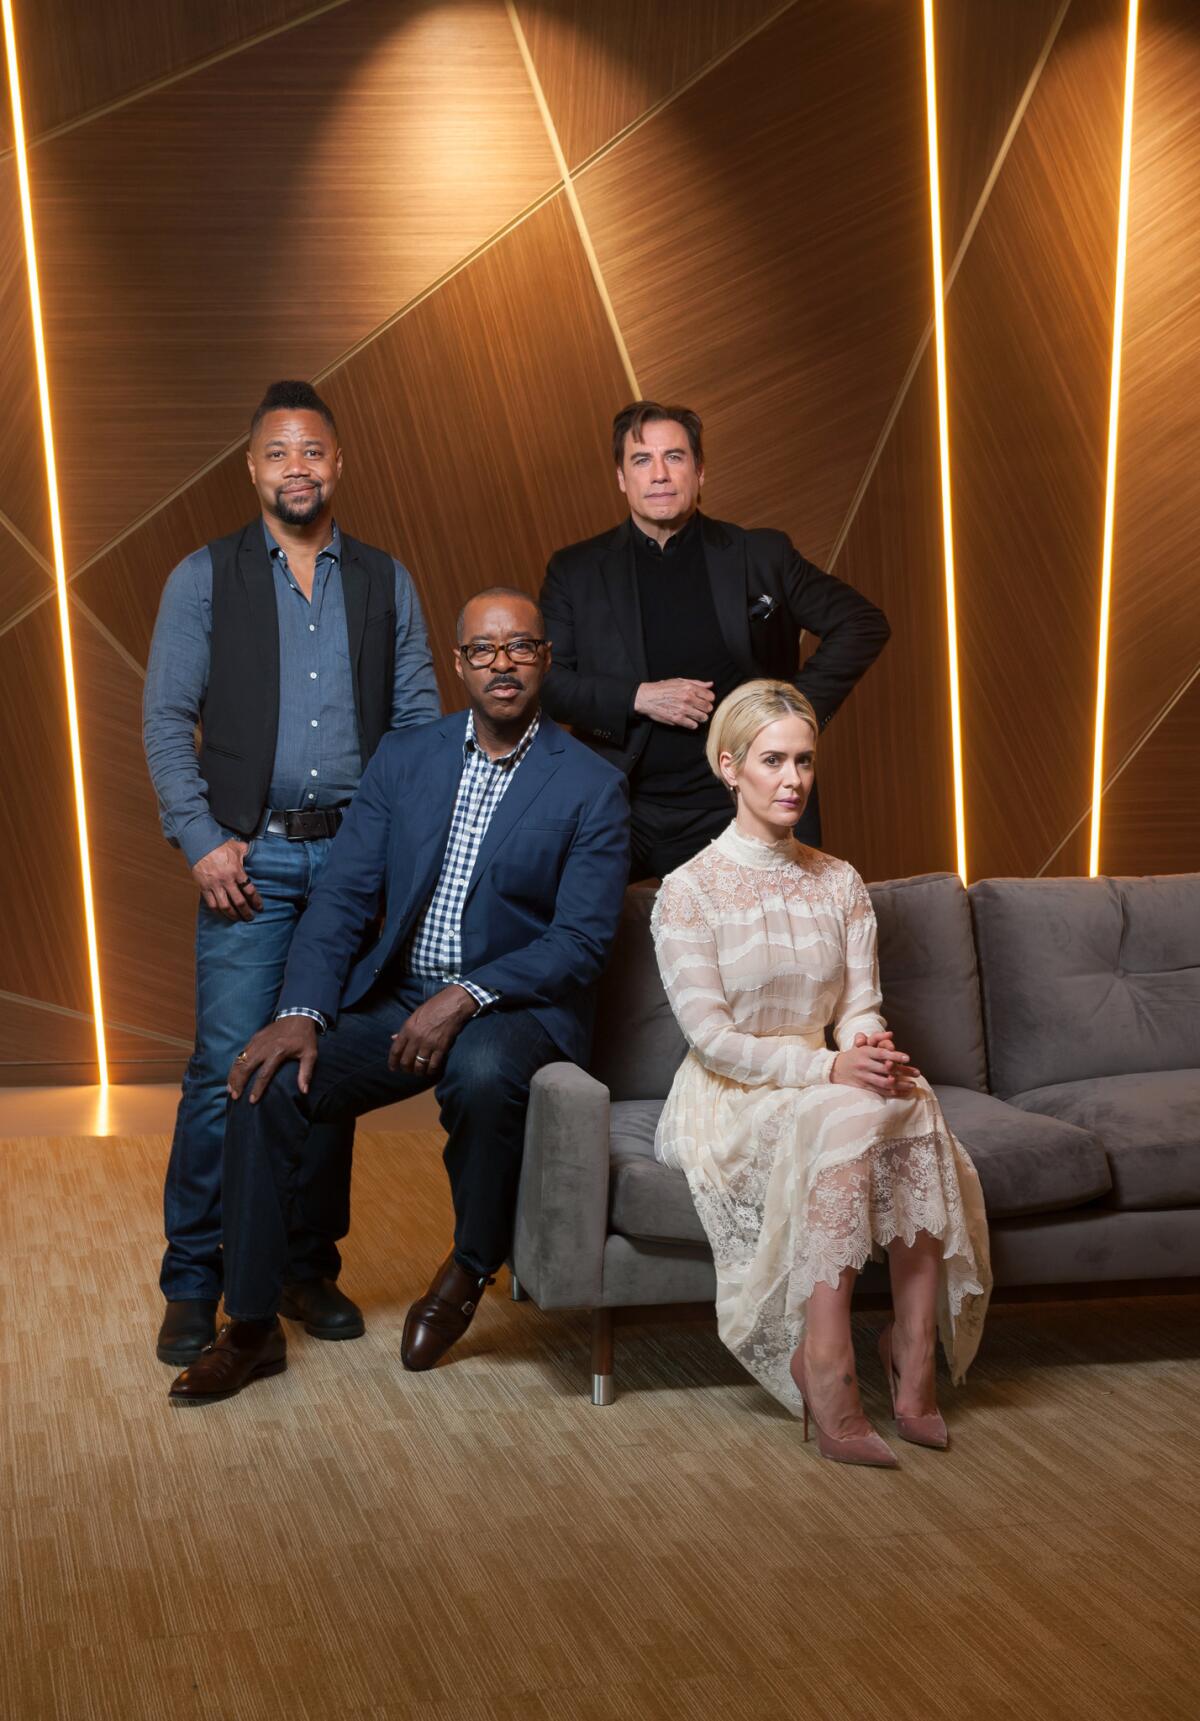 "The People v. O.J. Simpson" cast members Cuba Gooding Jr., Courtney B. Vance, John Travolta and Sarah Paulson, gathered for a chat with The Envelope. (Christina House / For The Times)